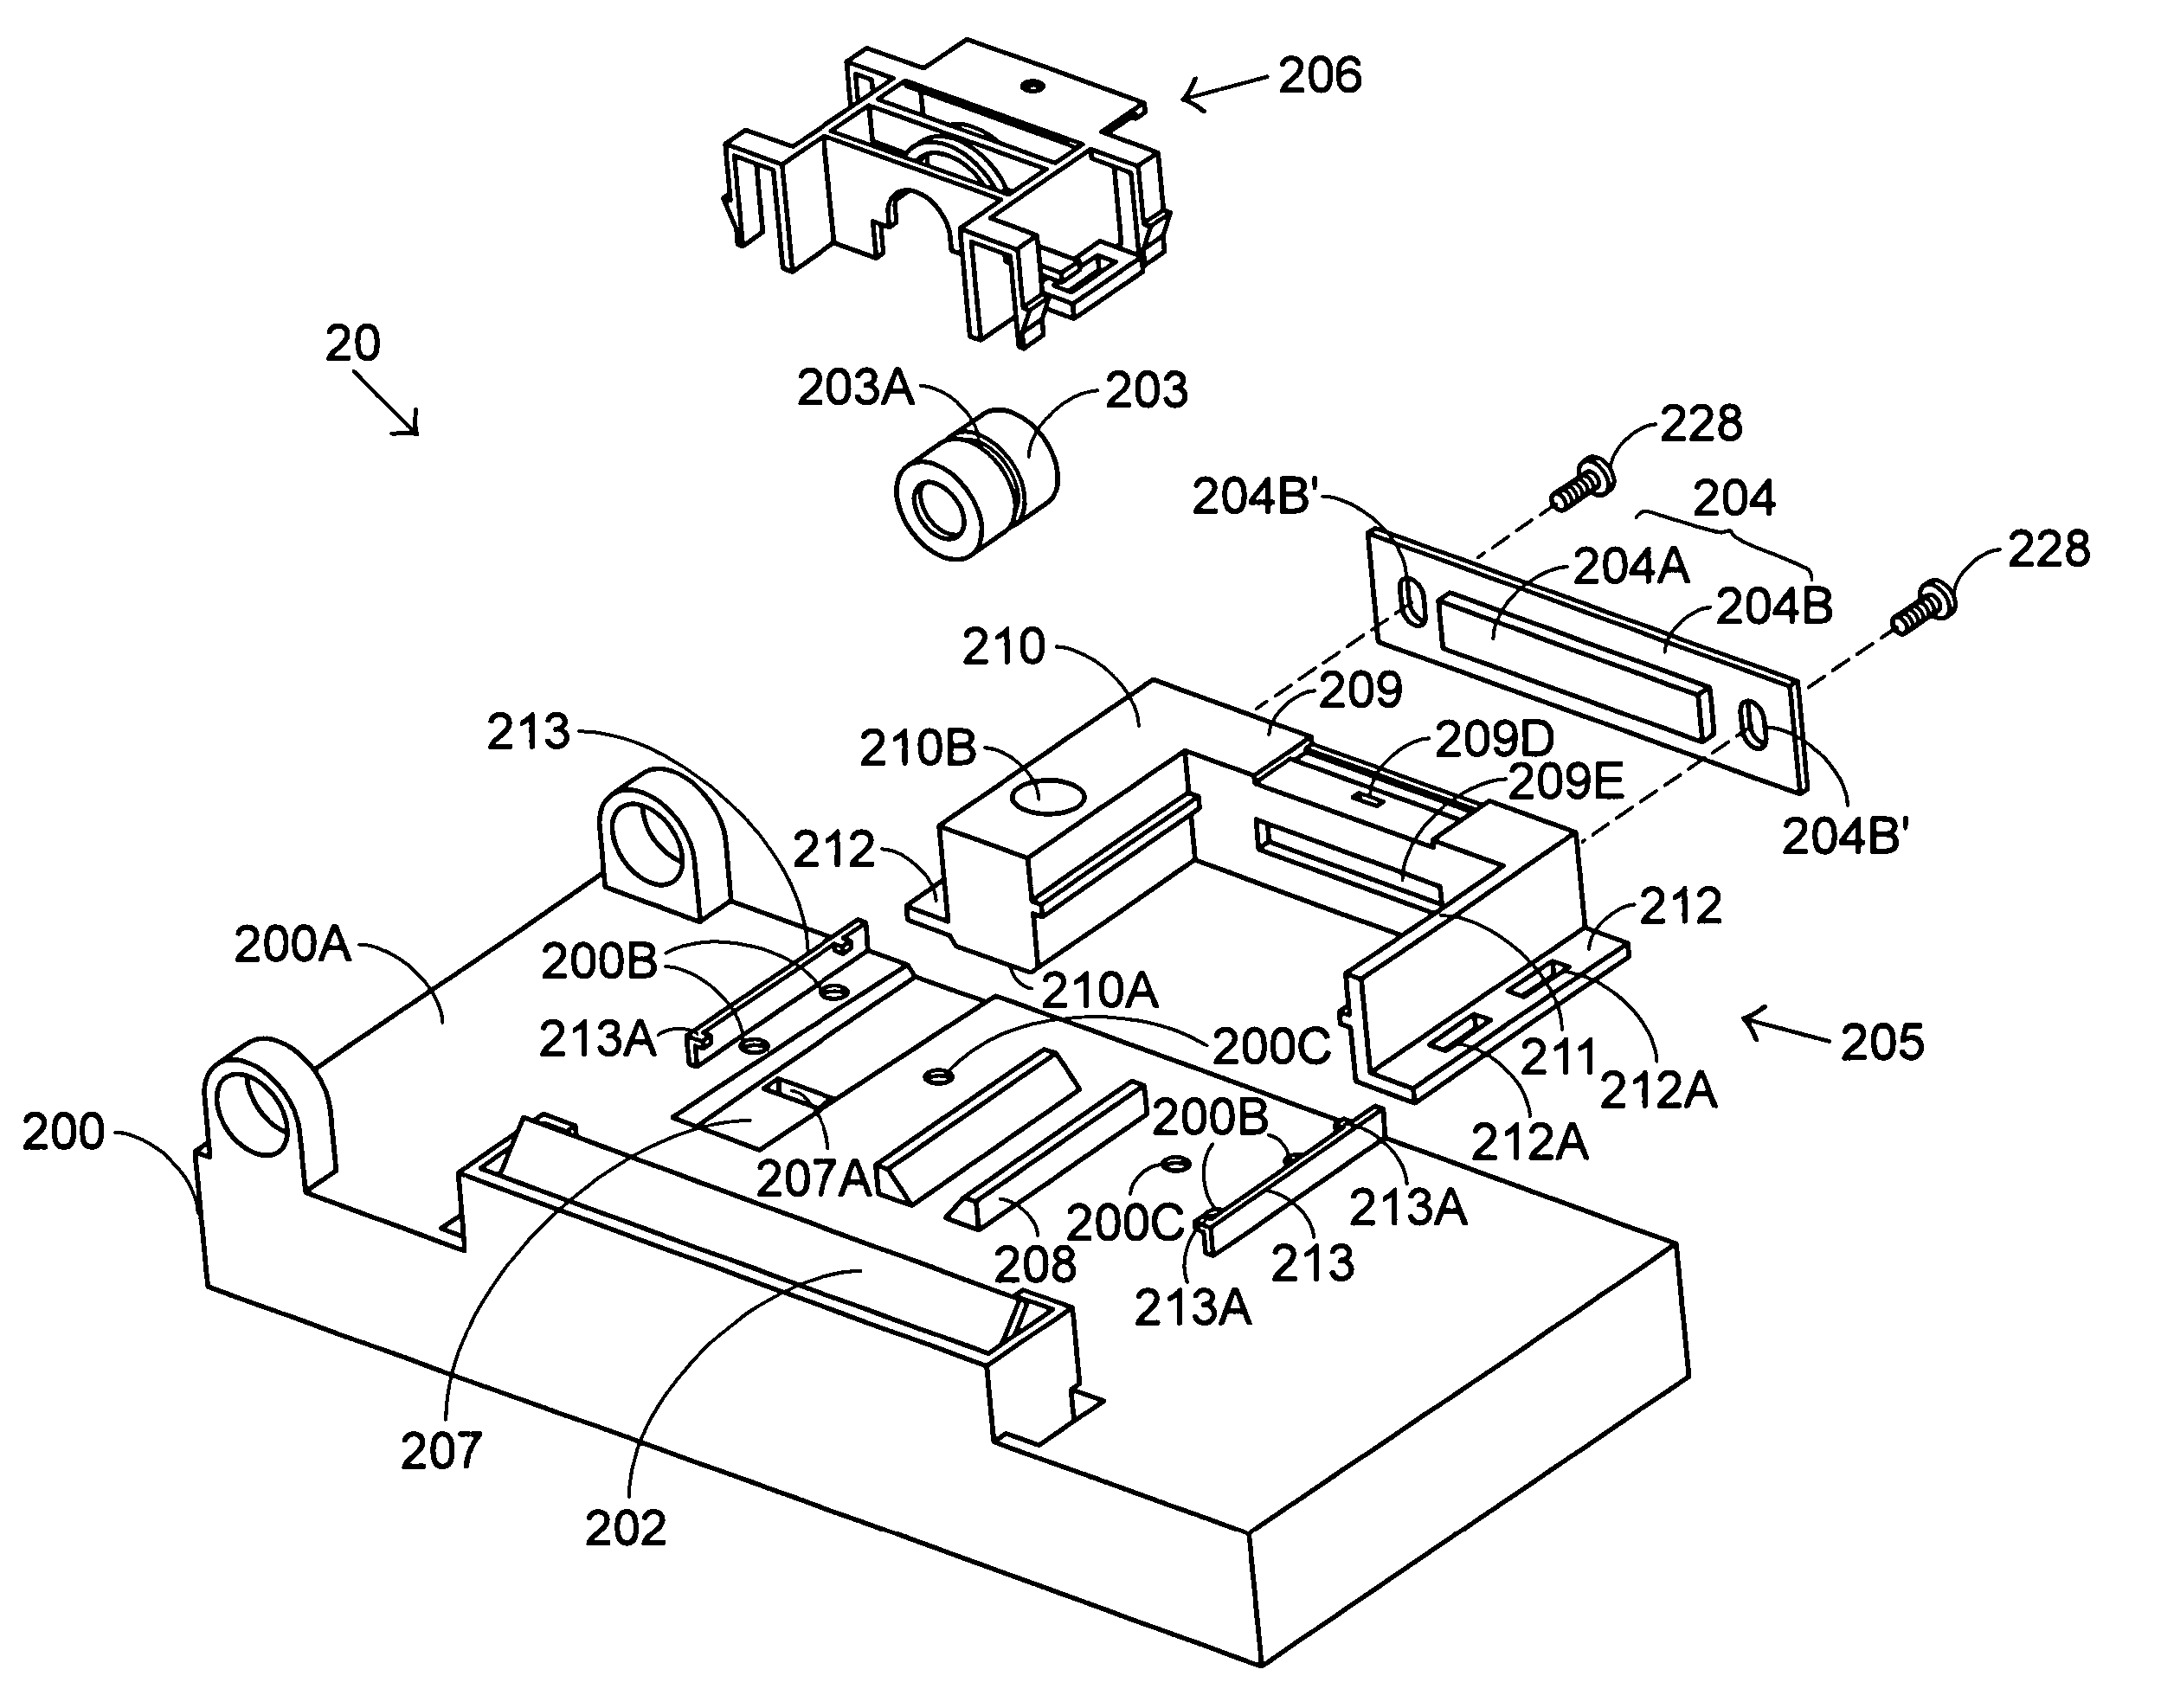 Optical reading head of scanning apparatus